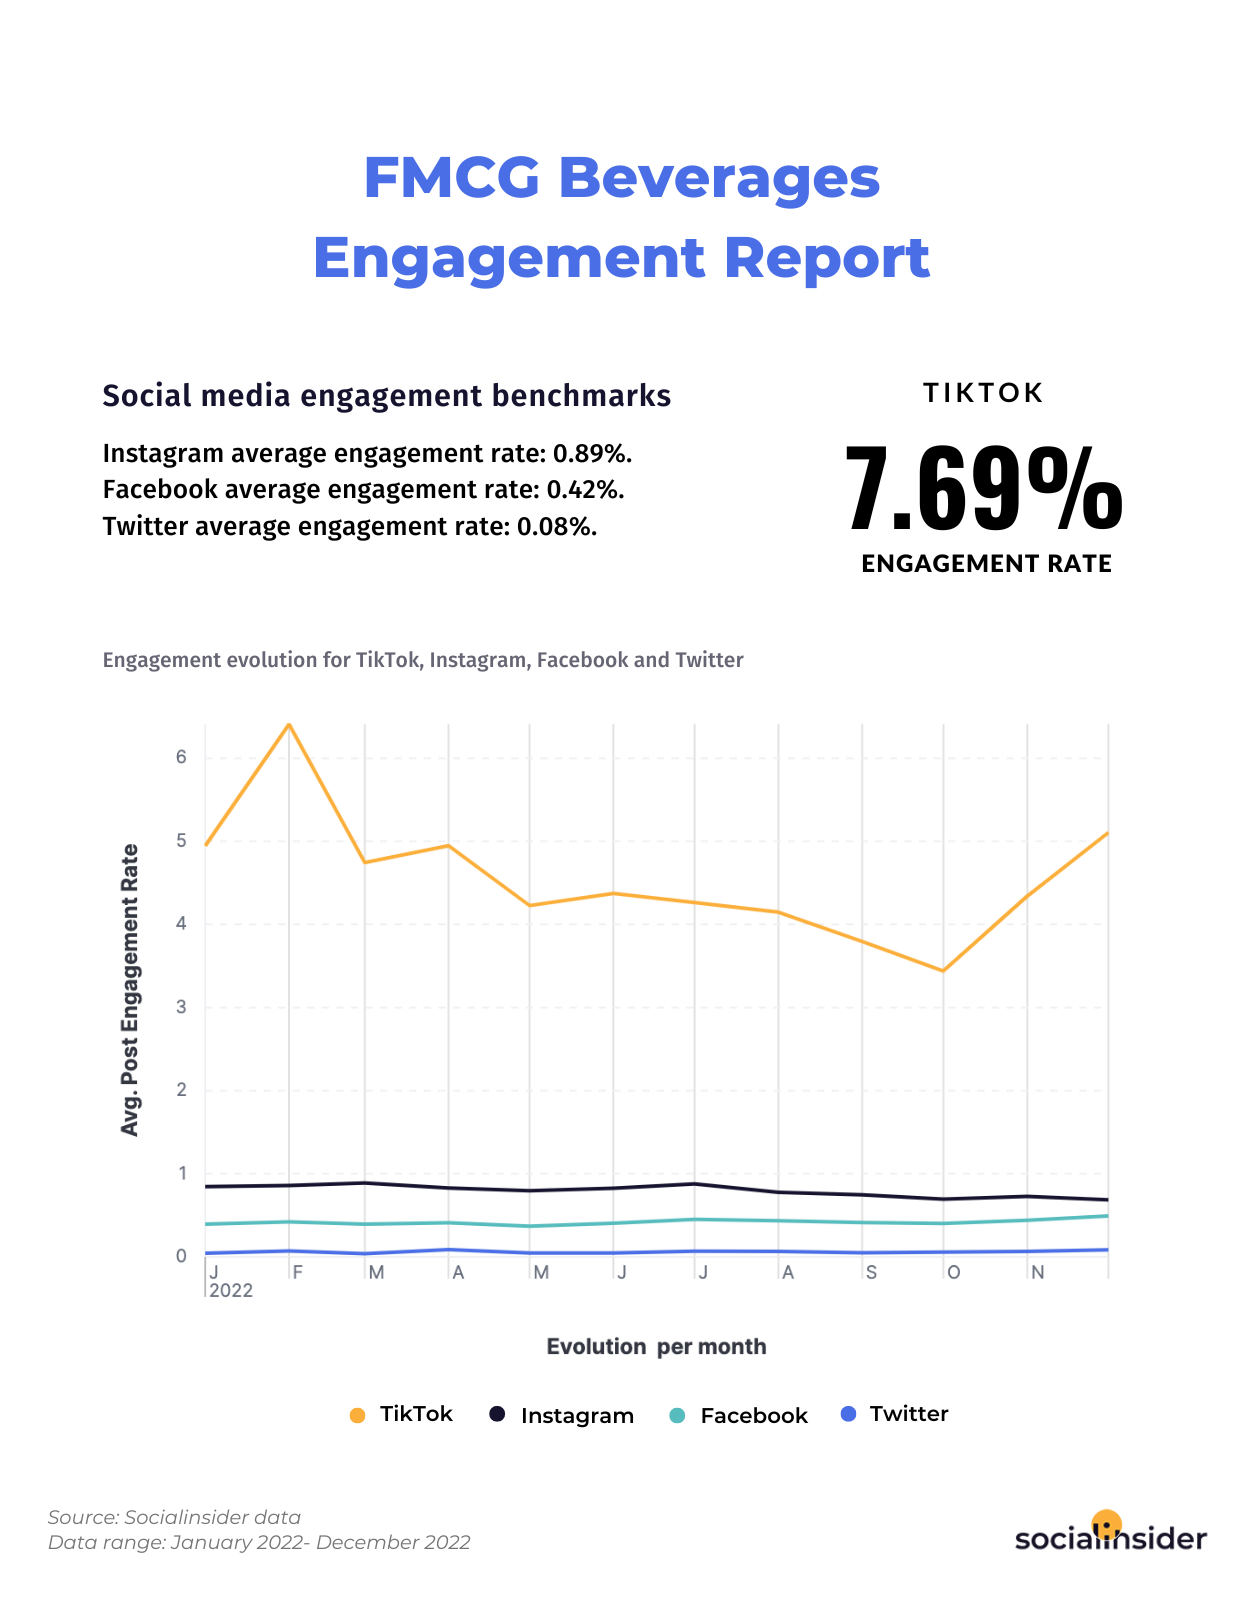 This is a chart indicating social media benchmarks and performance insights for businesses within the beverages industry.